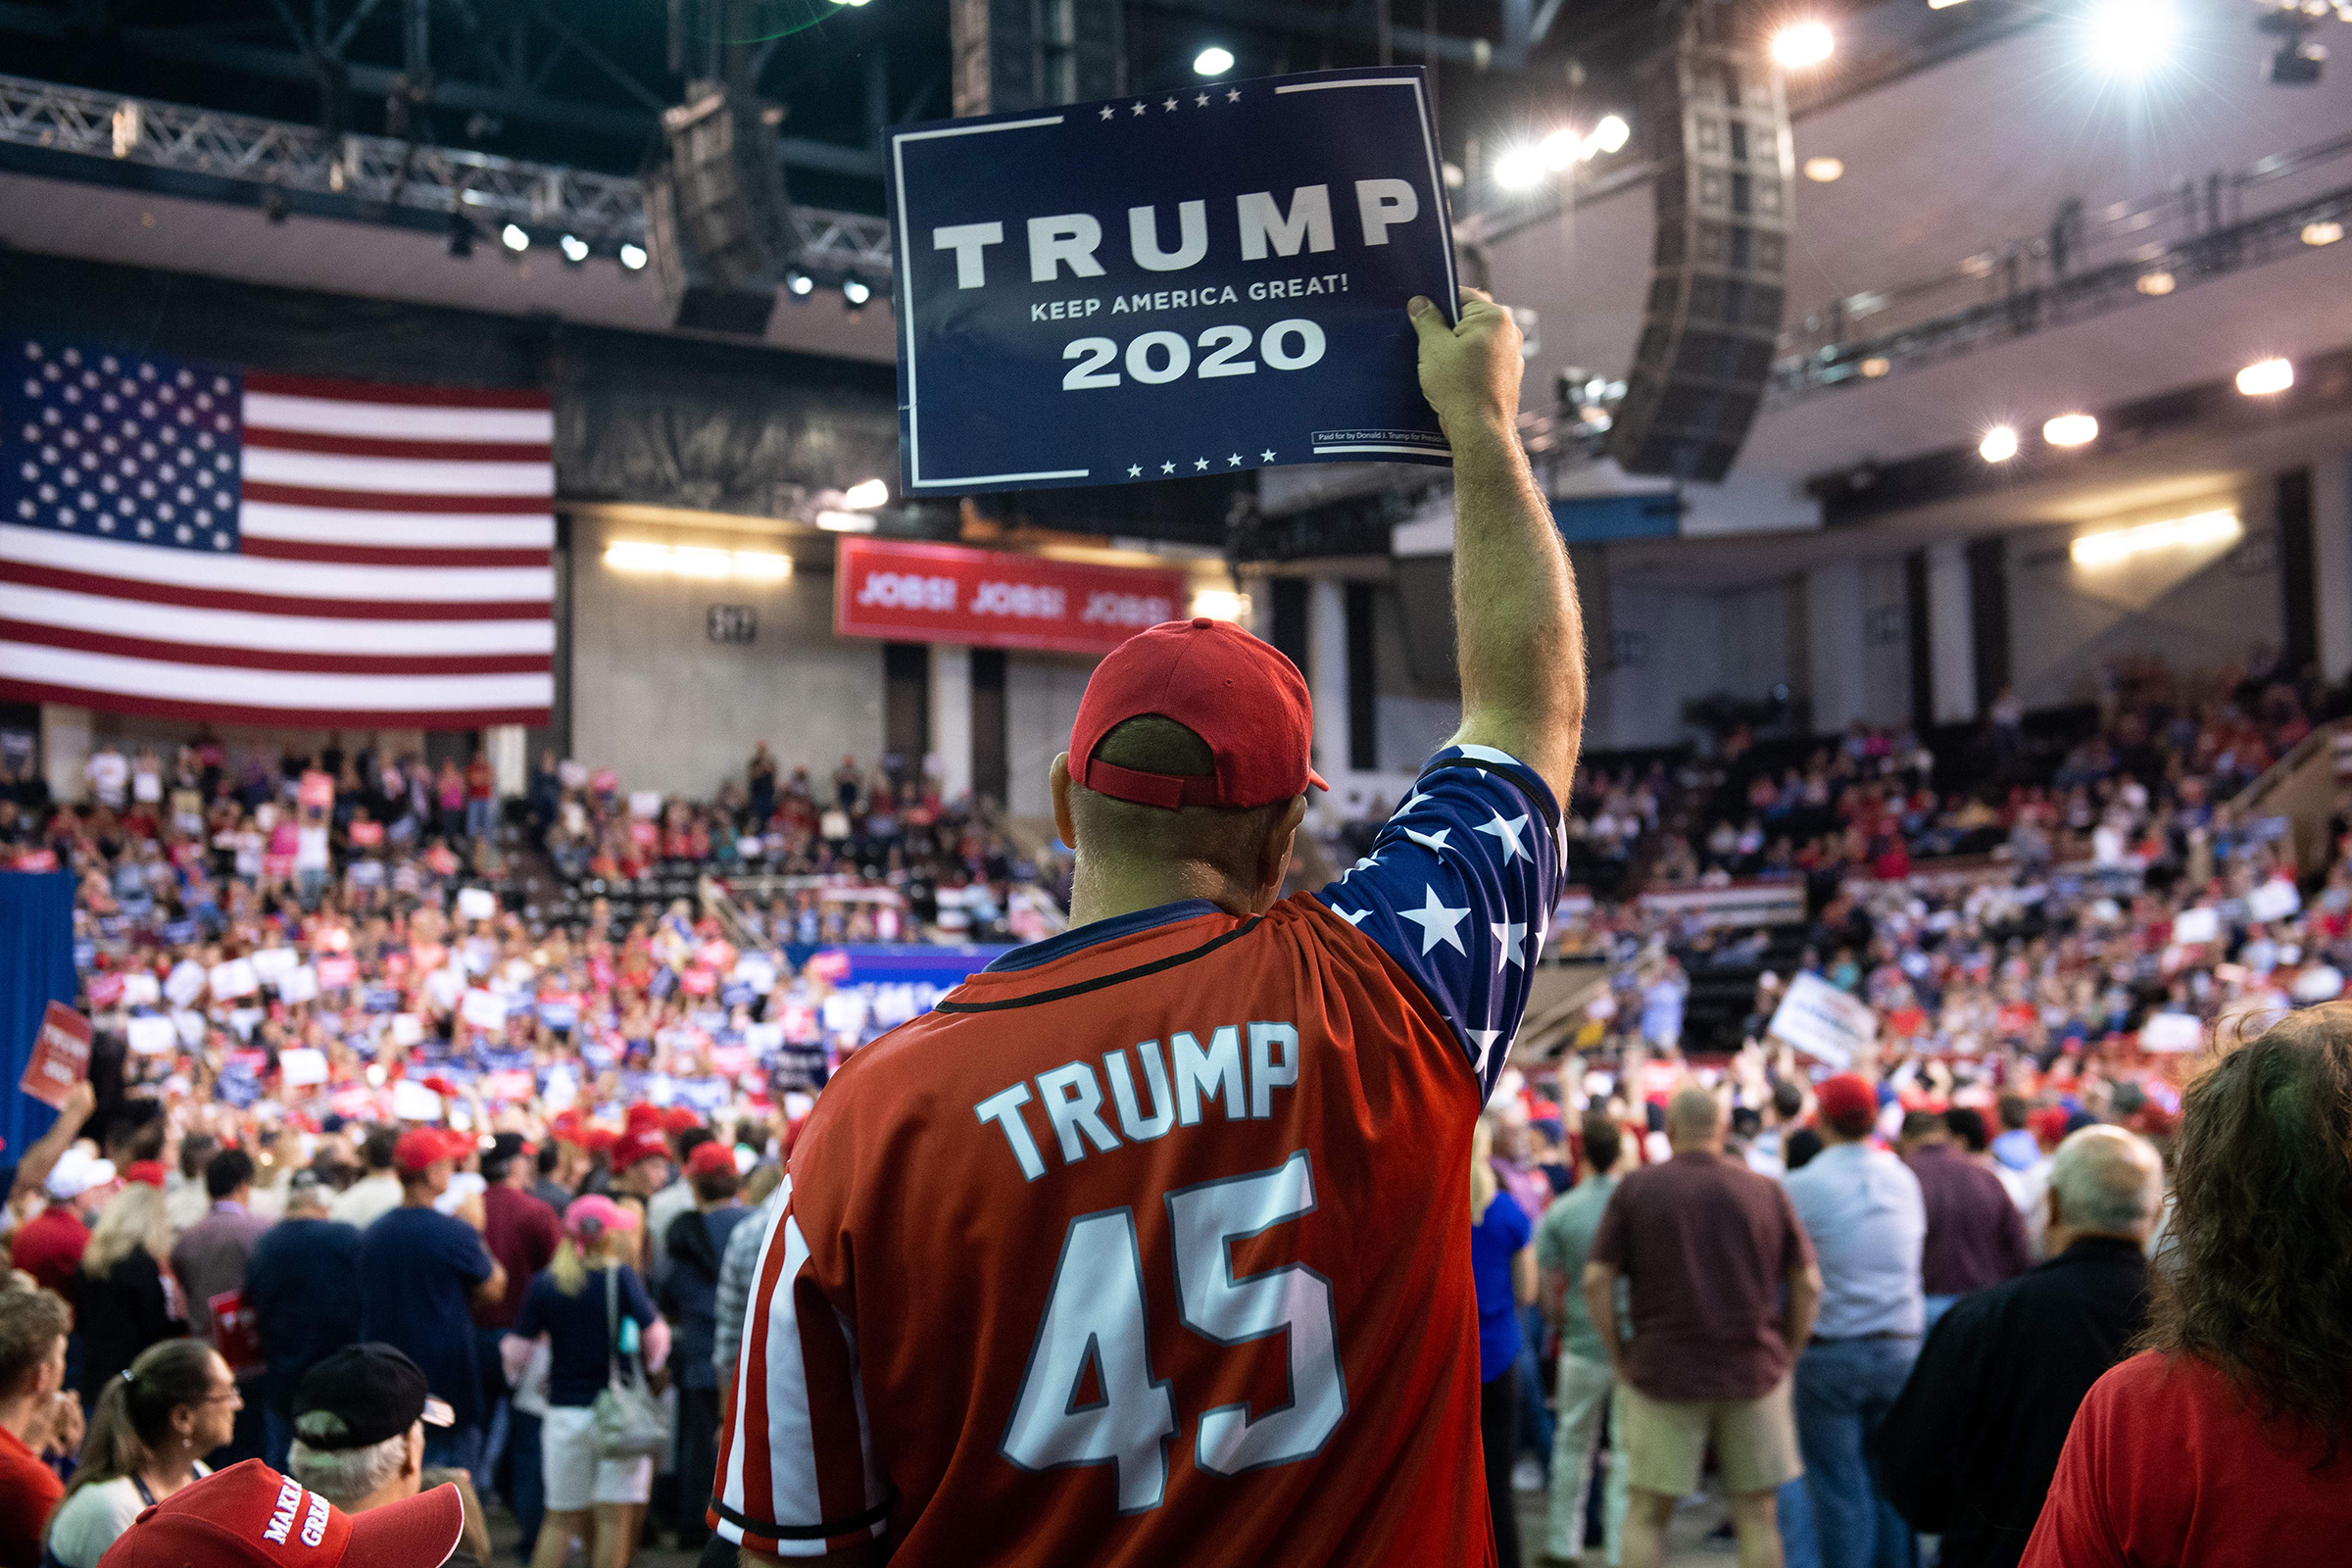 A Trump supporter holds up a sign as the US president speaks during a "Keep America Great" rally at Sudduth Coliseum in Lake Charles, La. on Oct. 11, 2019